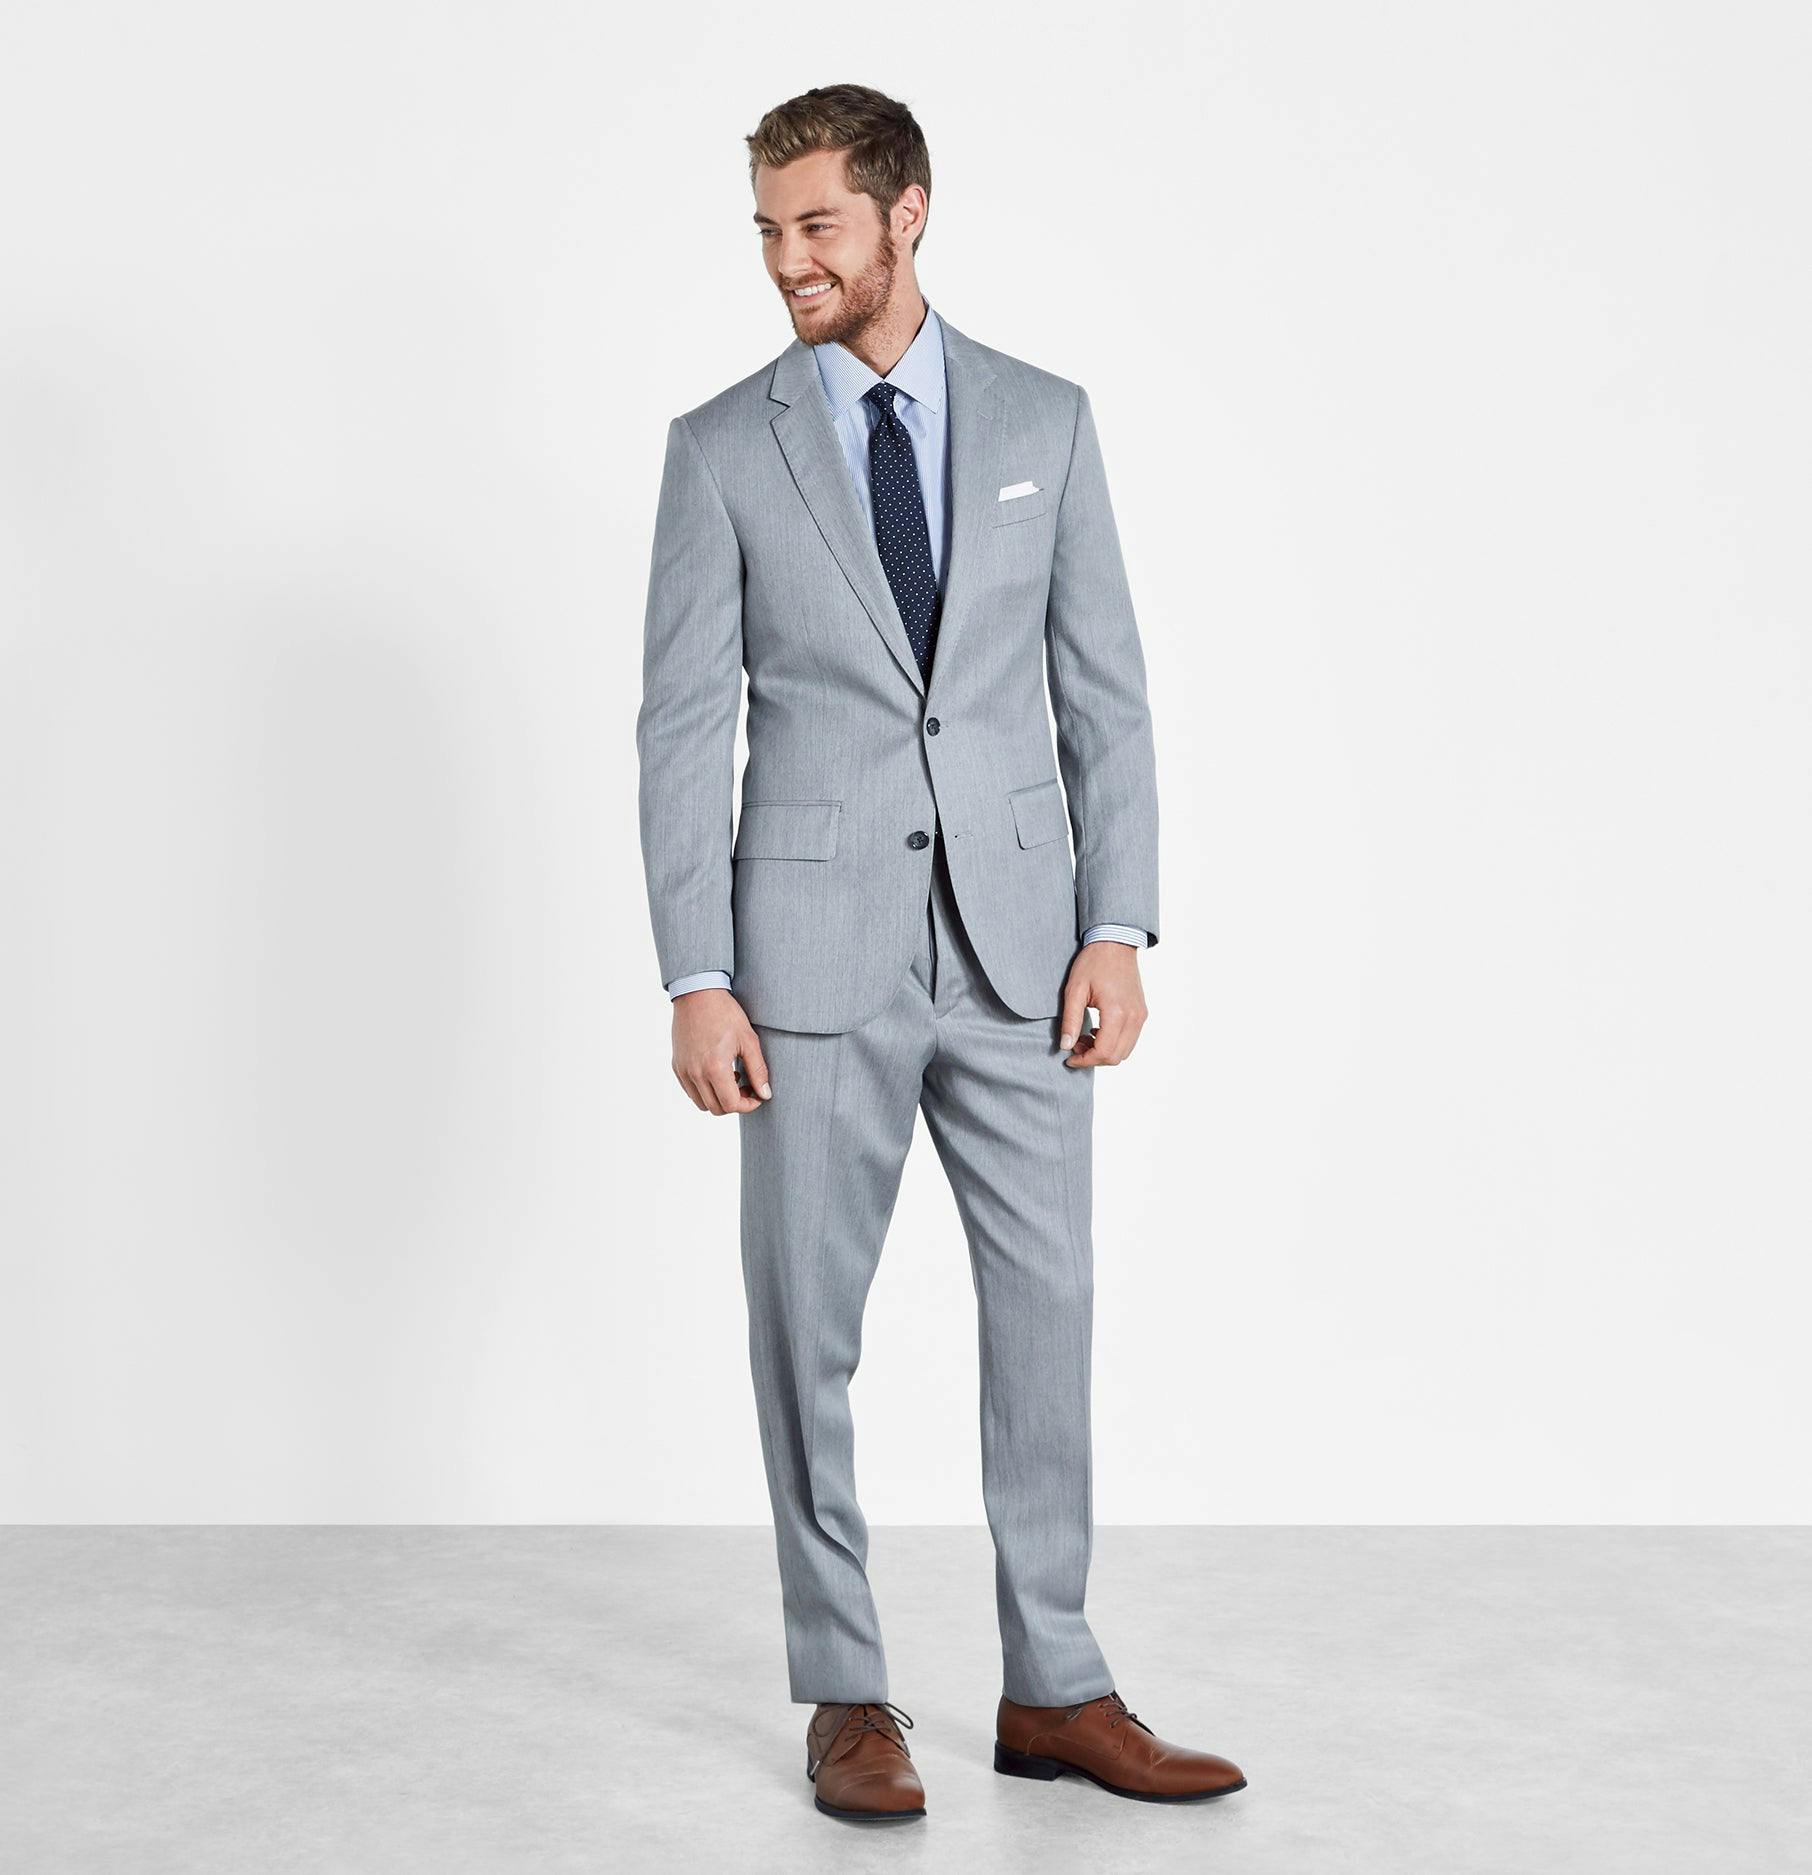 Like a cloud passing in front of the afternoon sun, this light grey suit provides the perfect shade to get you through any event in style. Includes jacket and pants. Pants are available in classic and slim fits.